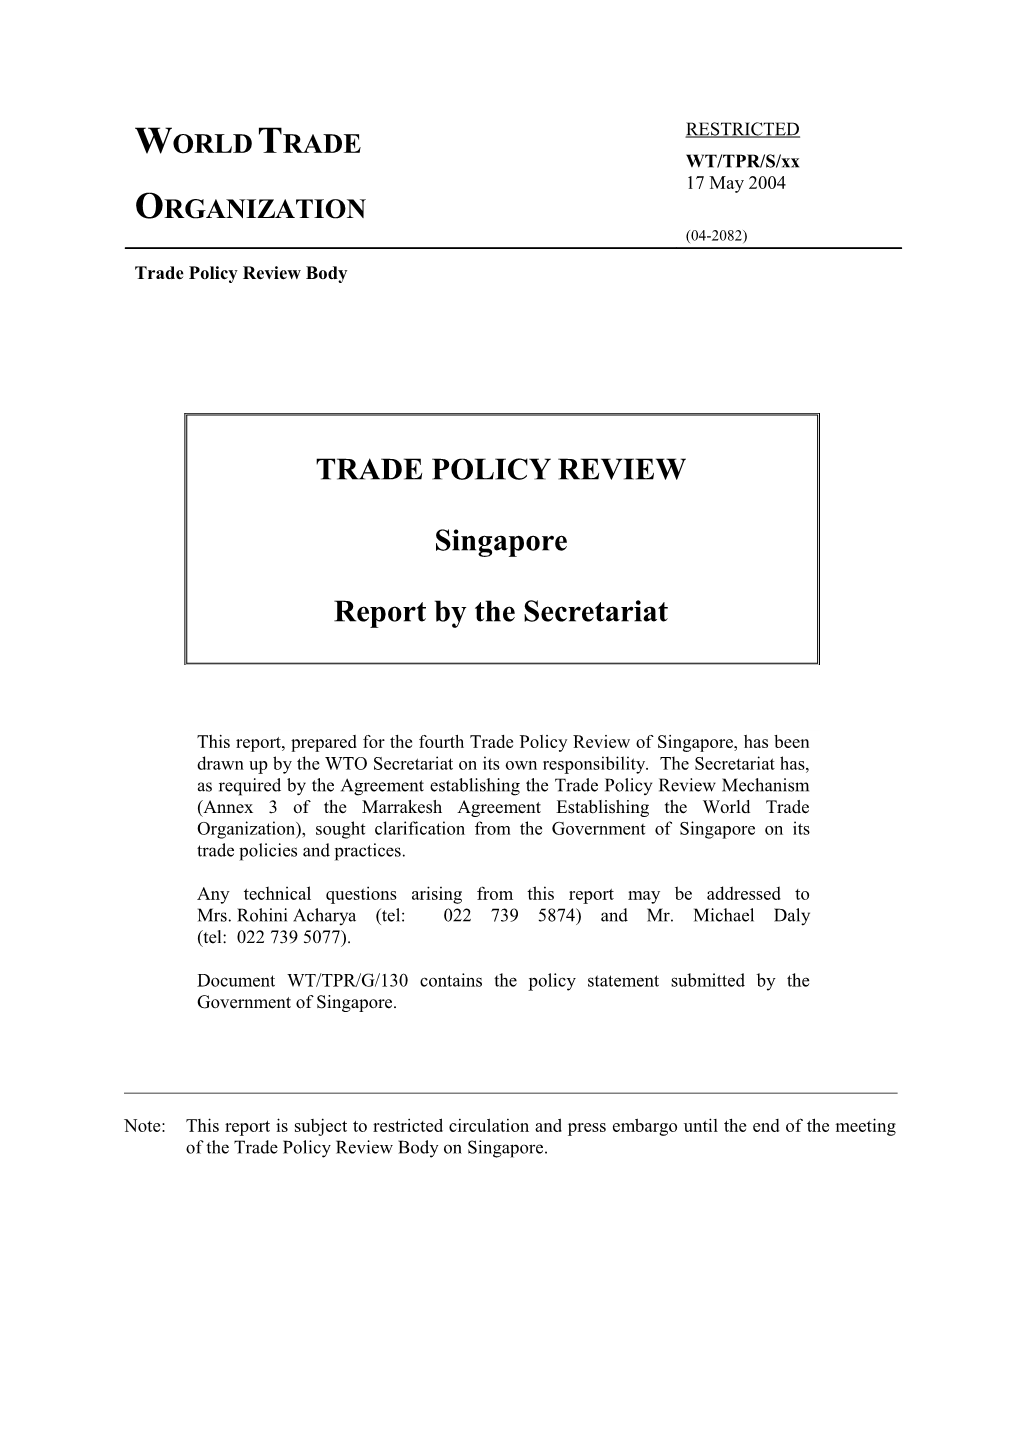 (2) Trade and Investment Policy Framework Vii